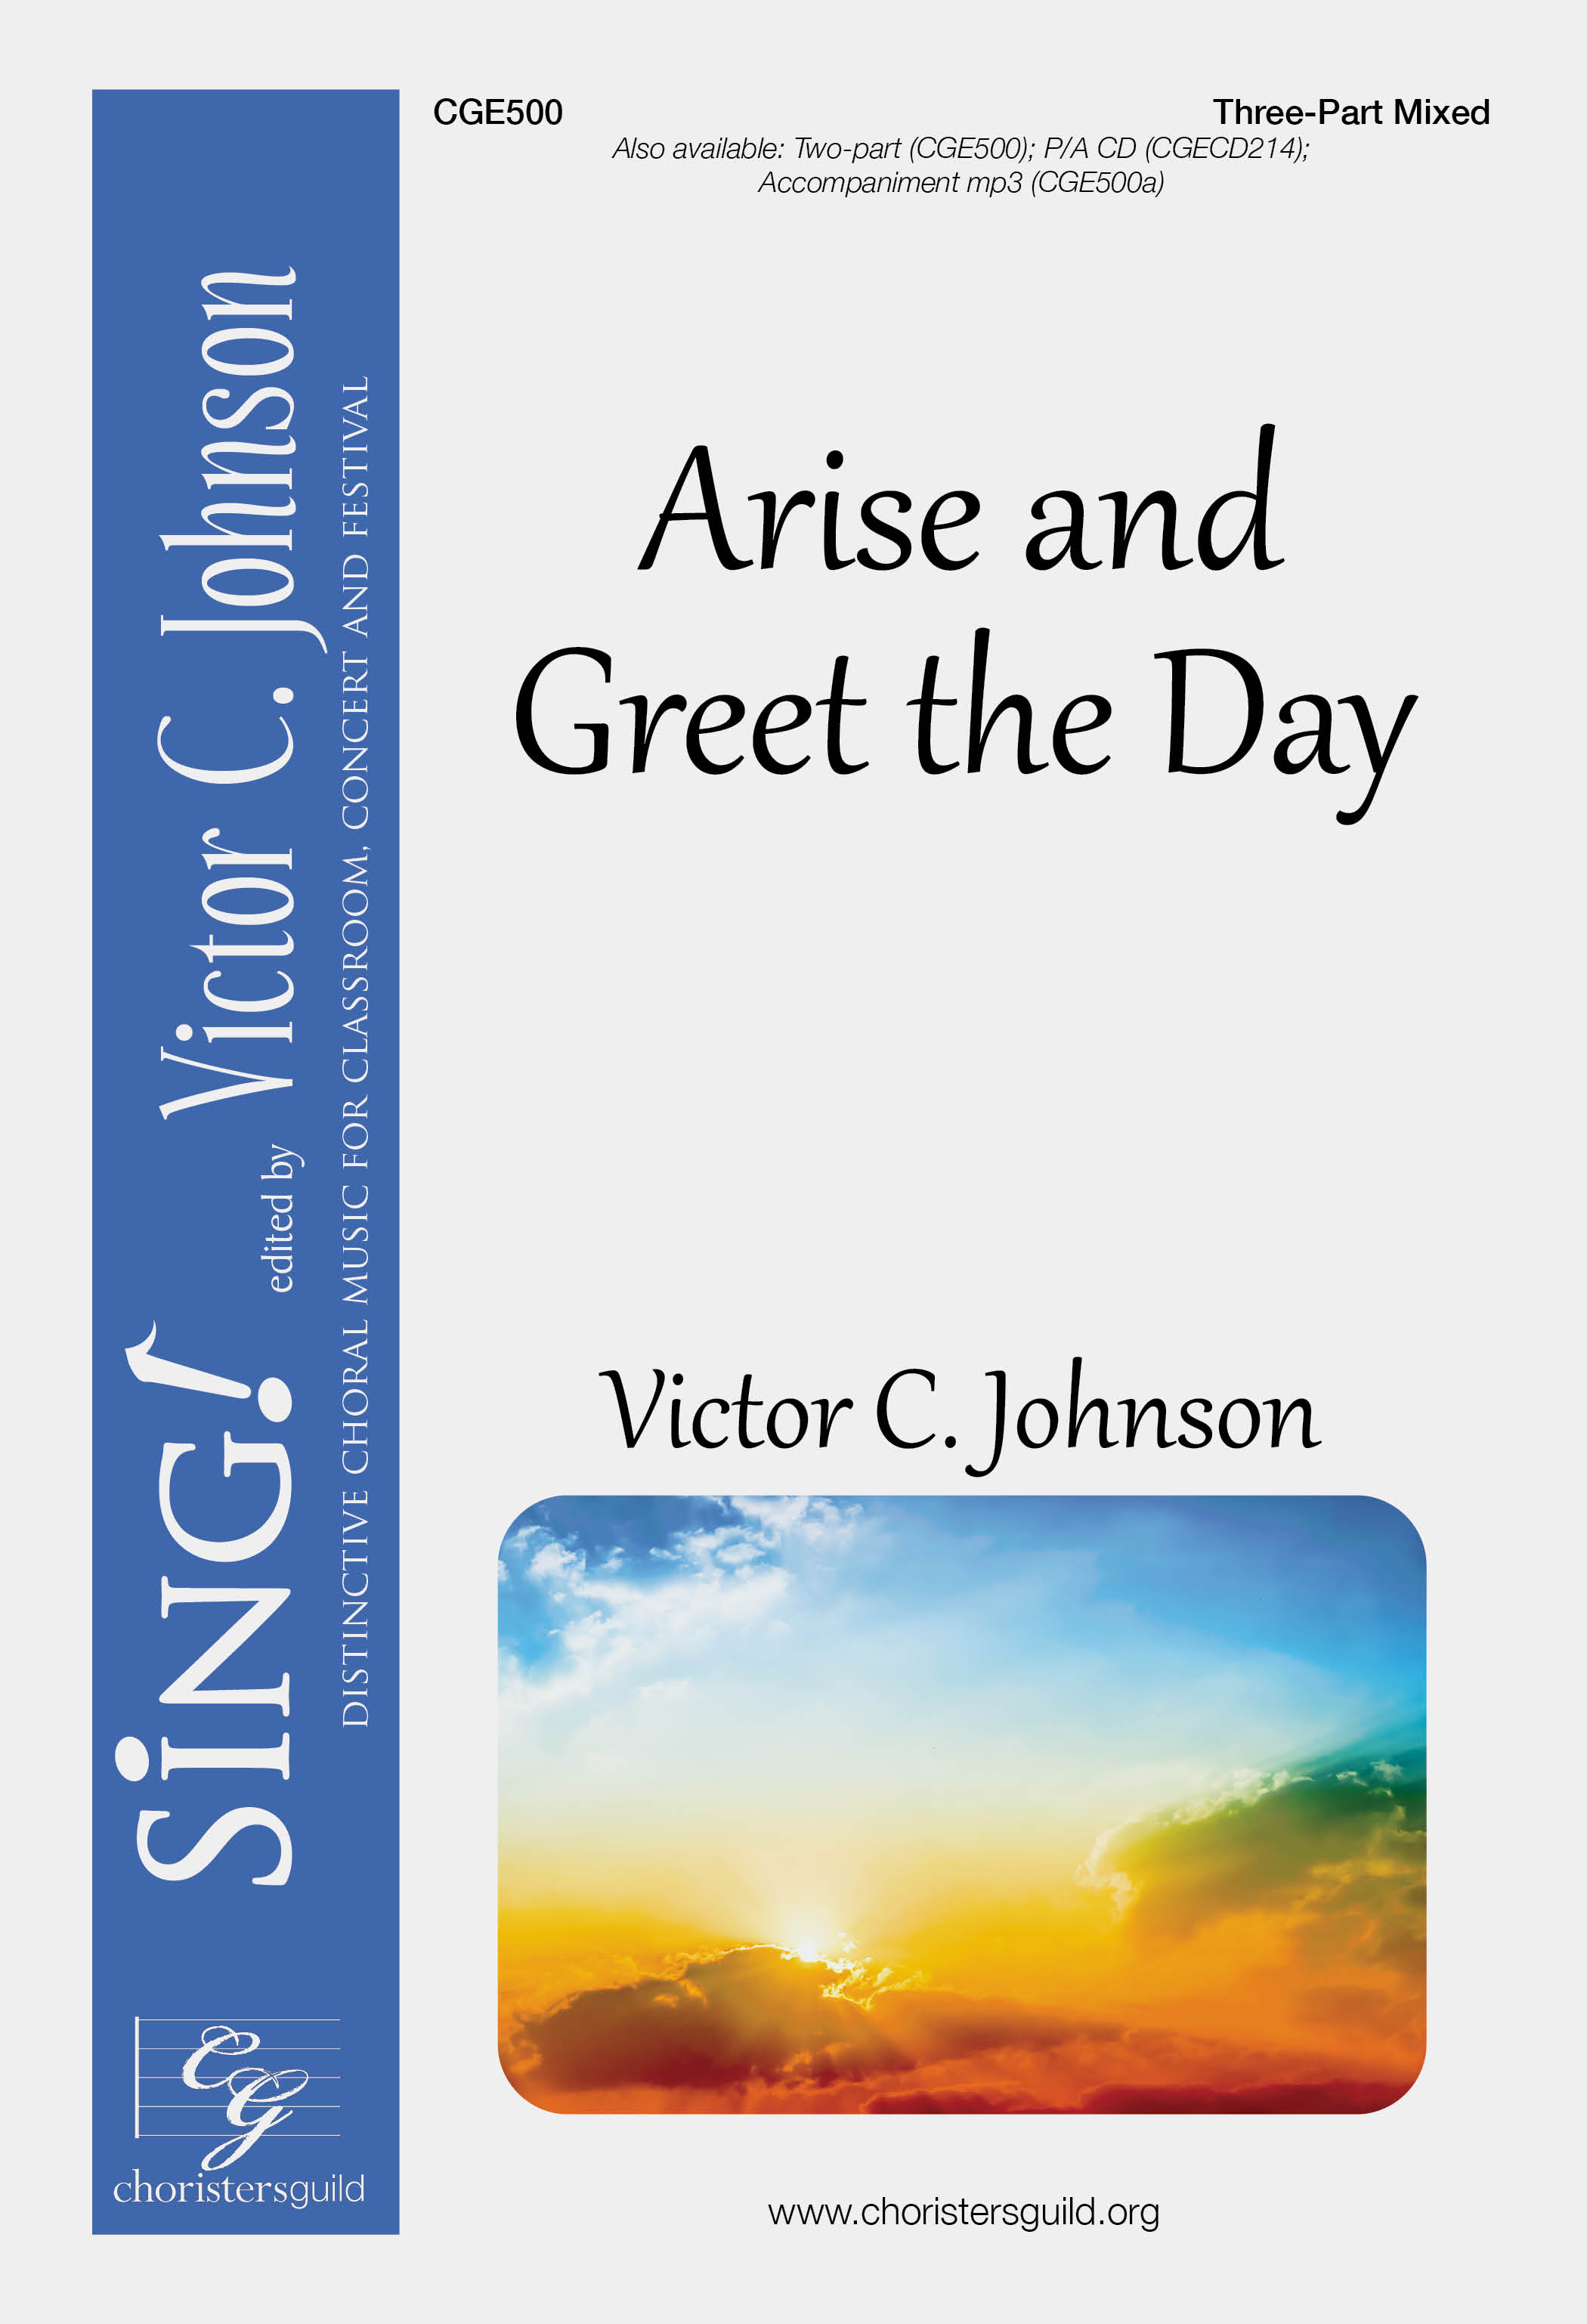 Arise and Greet the Day - Three-Part Mixed